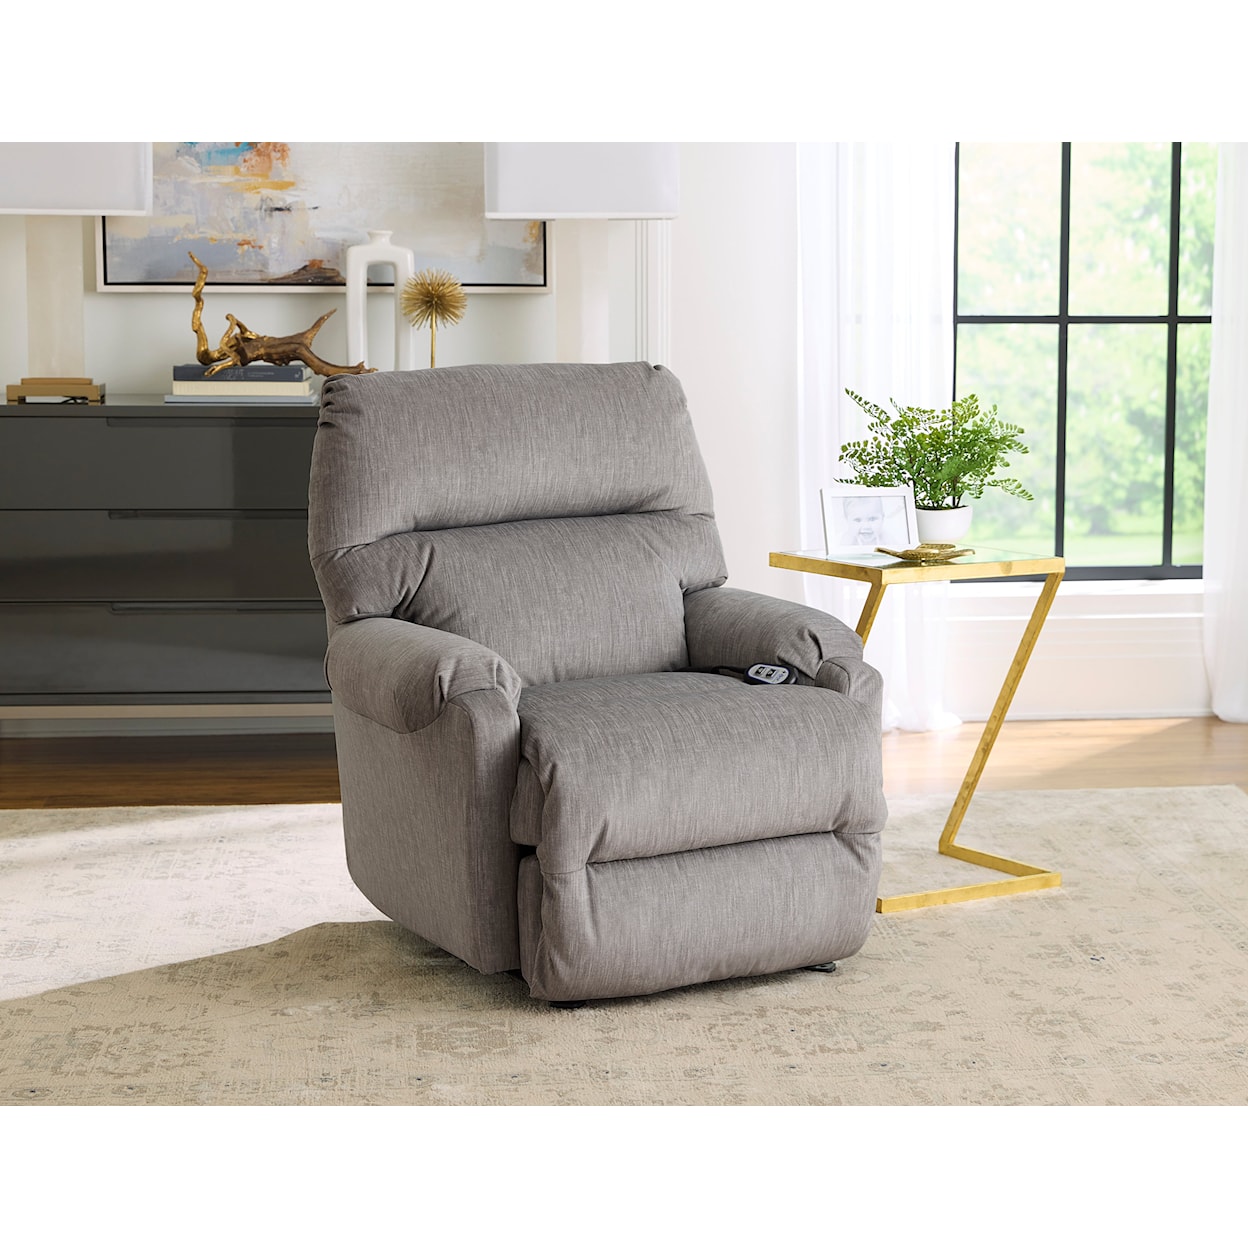 Best Home Furnishings Cannes Power Swivel Glider Recliner